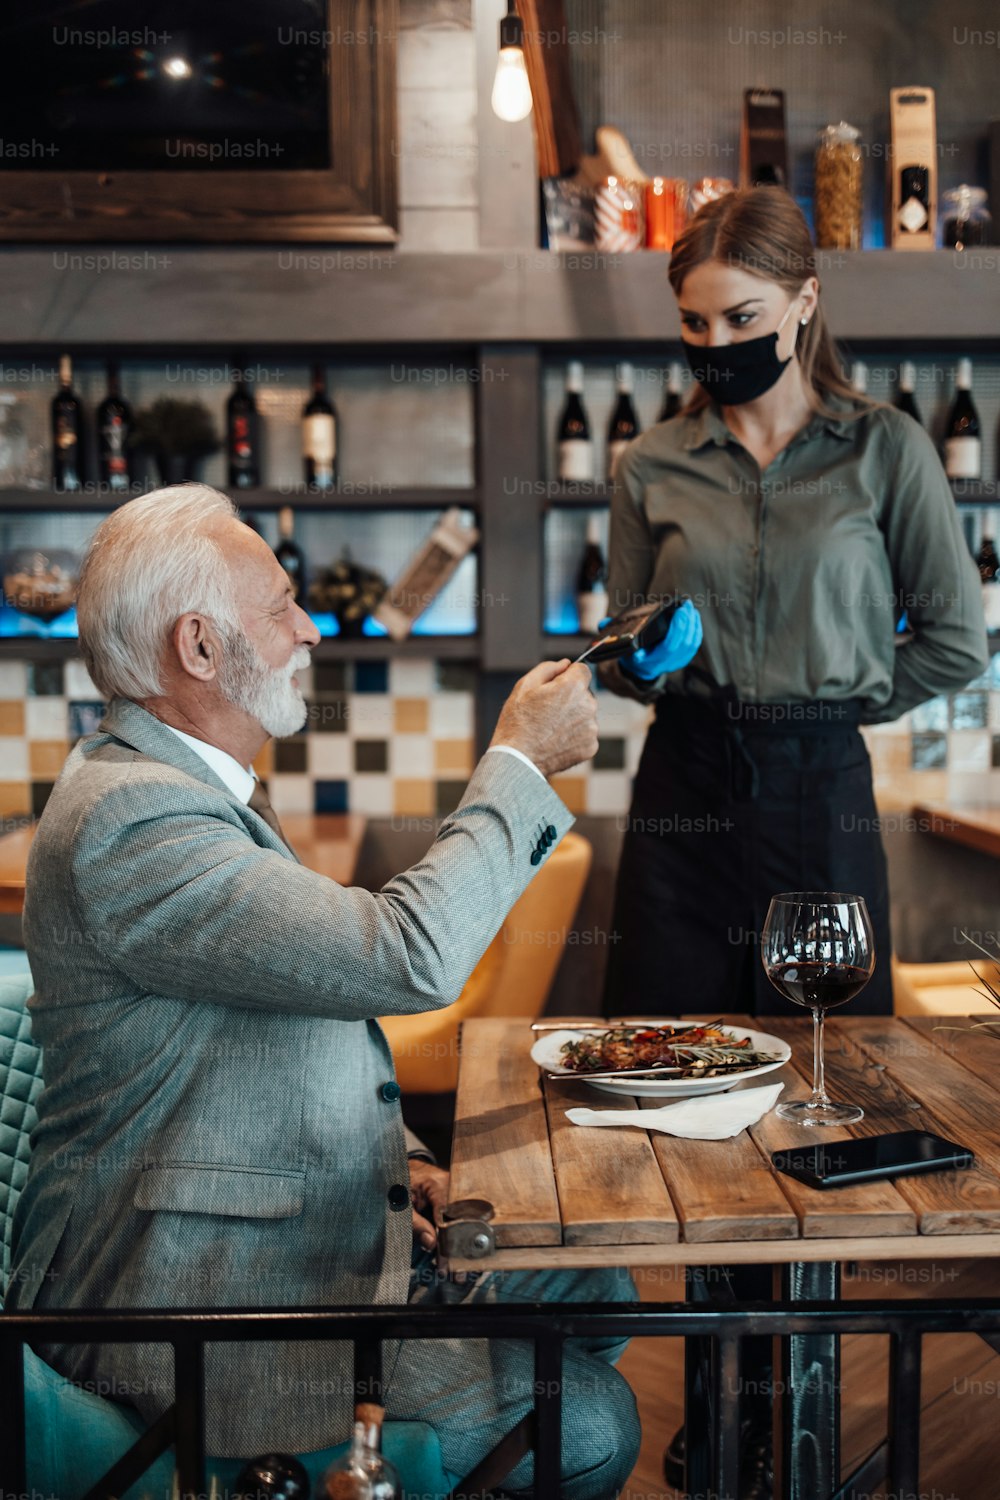 Waitress serves senior gentleman. She holds a card reader while businessman uses his credit card to pay bill. She wears a protective mask as part of security measures against the Coronavirus pandemic.